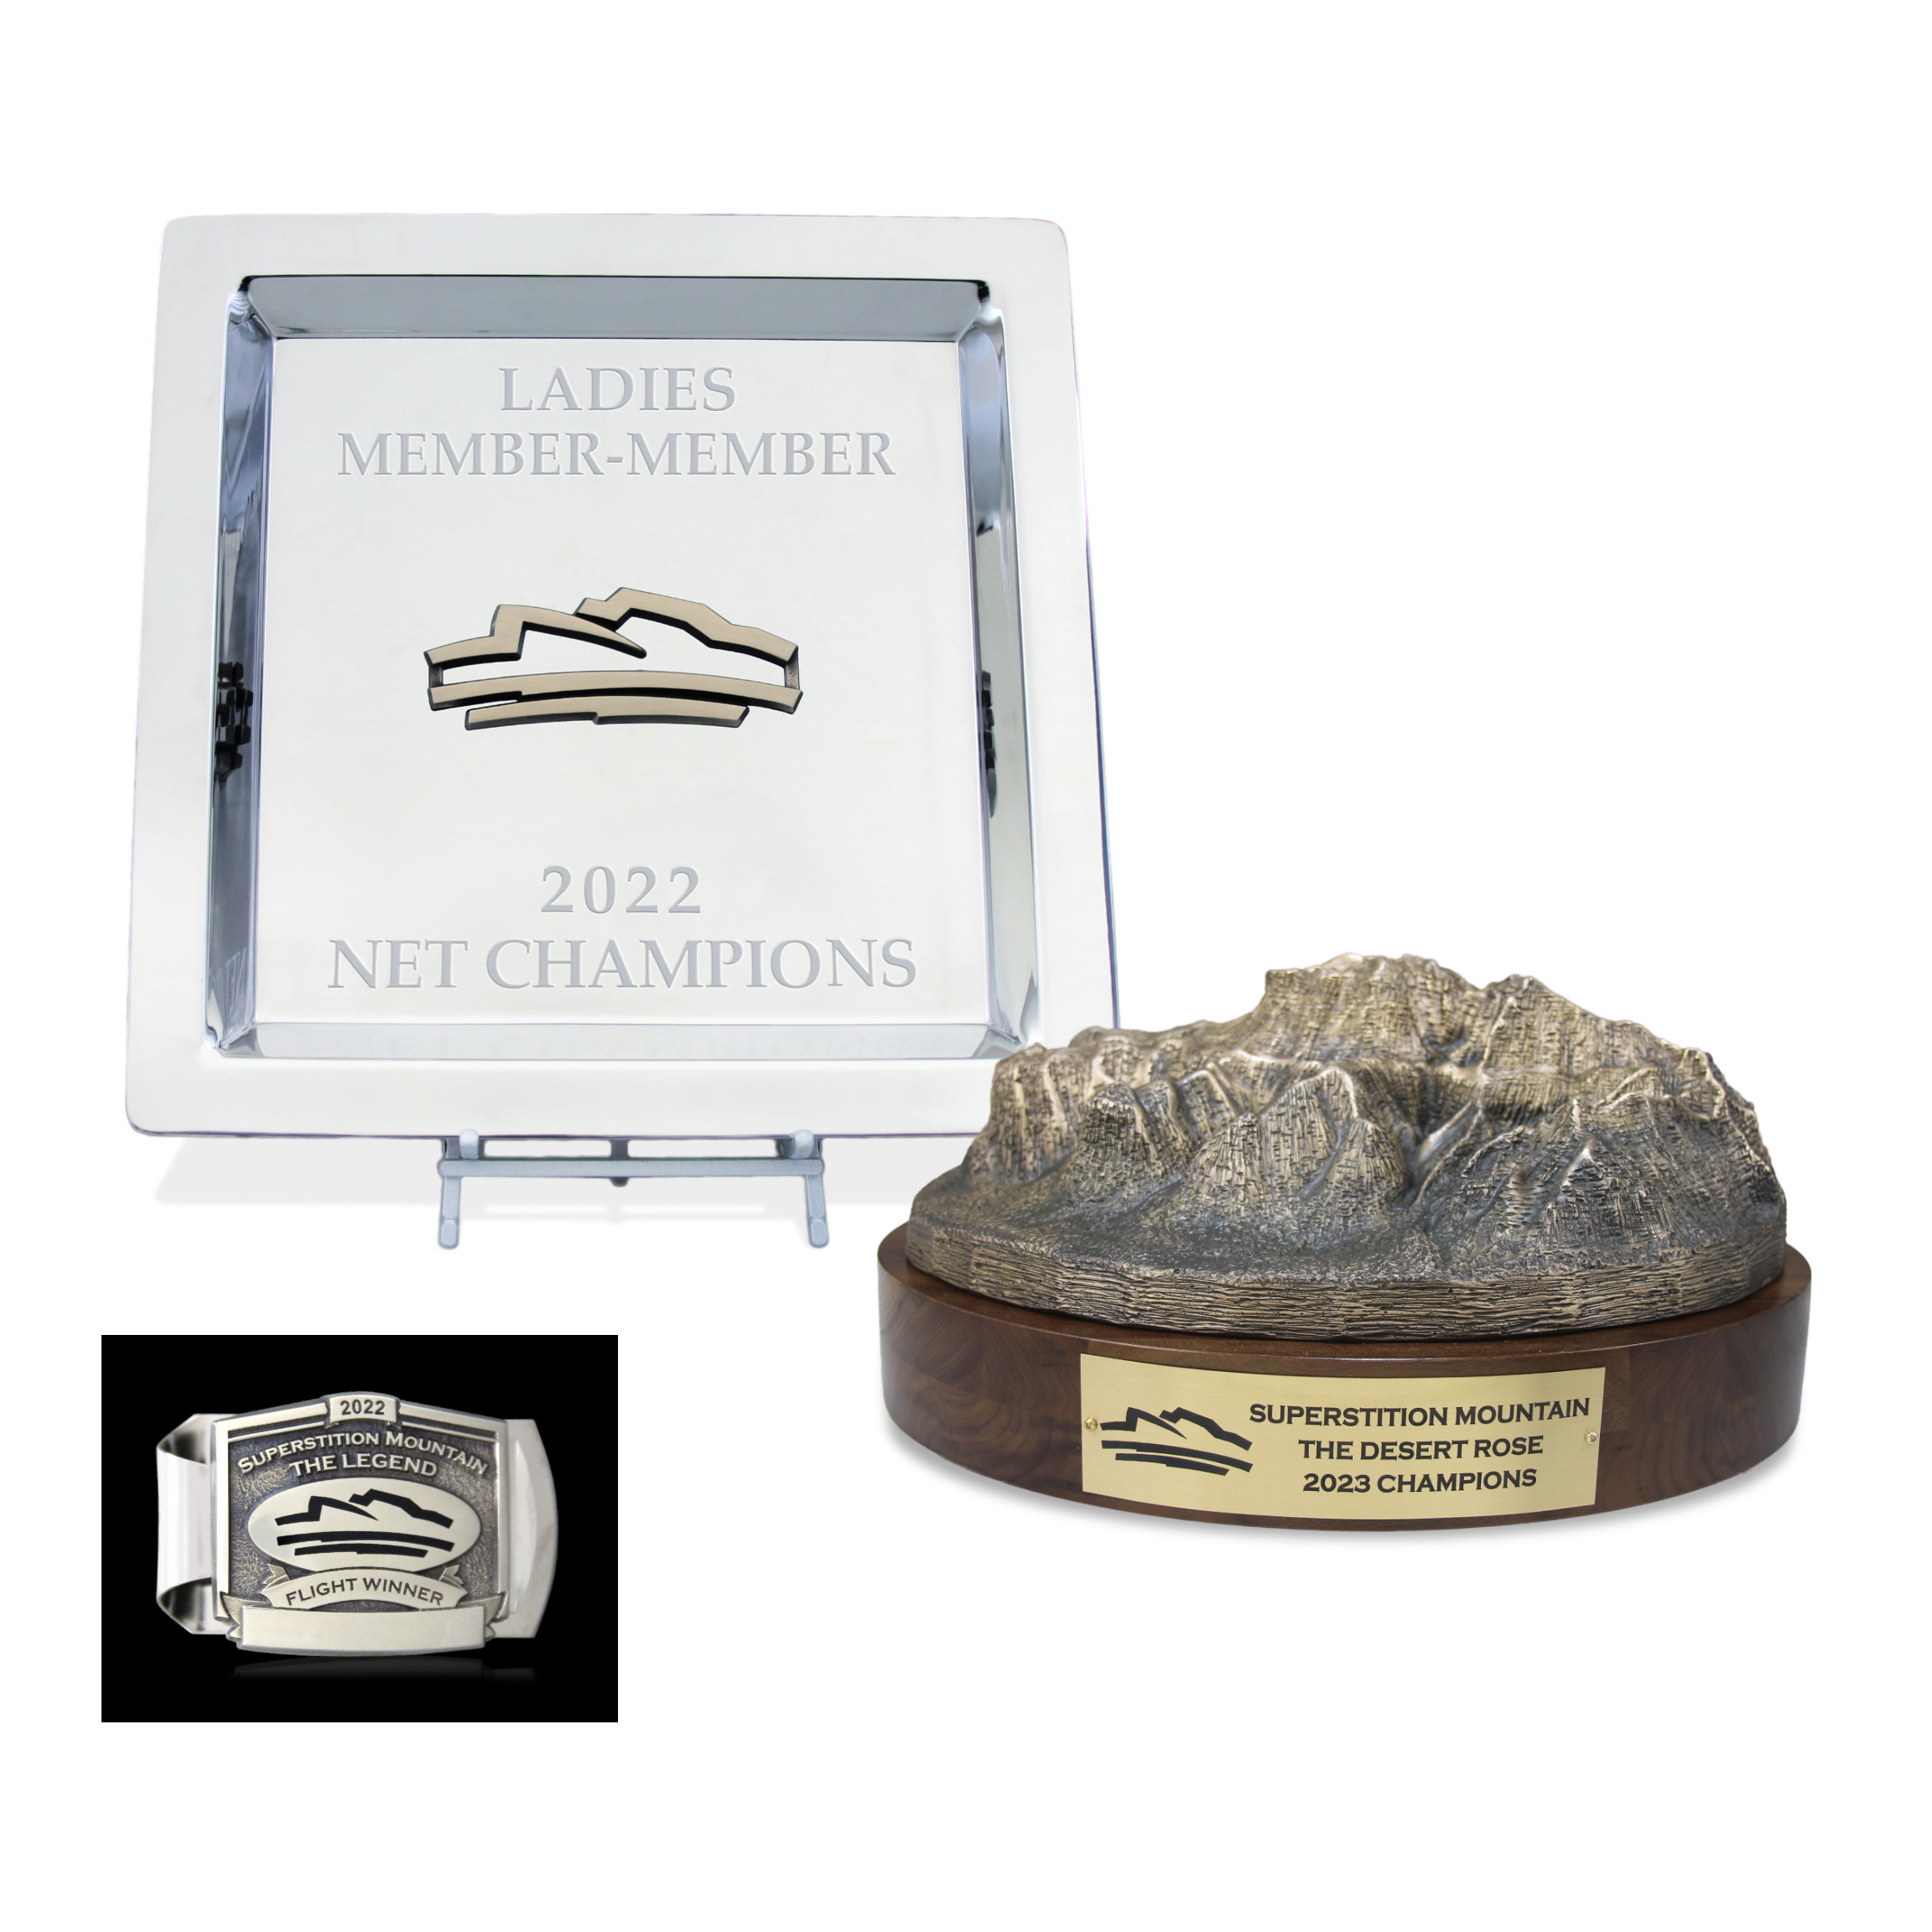 Superstition Mountain Awards made by Malcolm DeMille